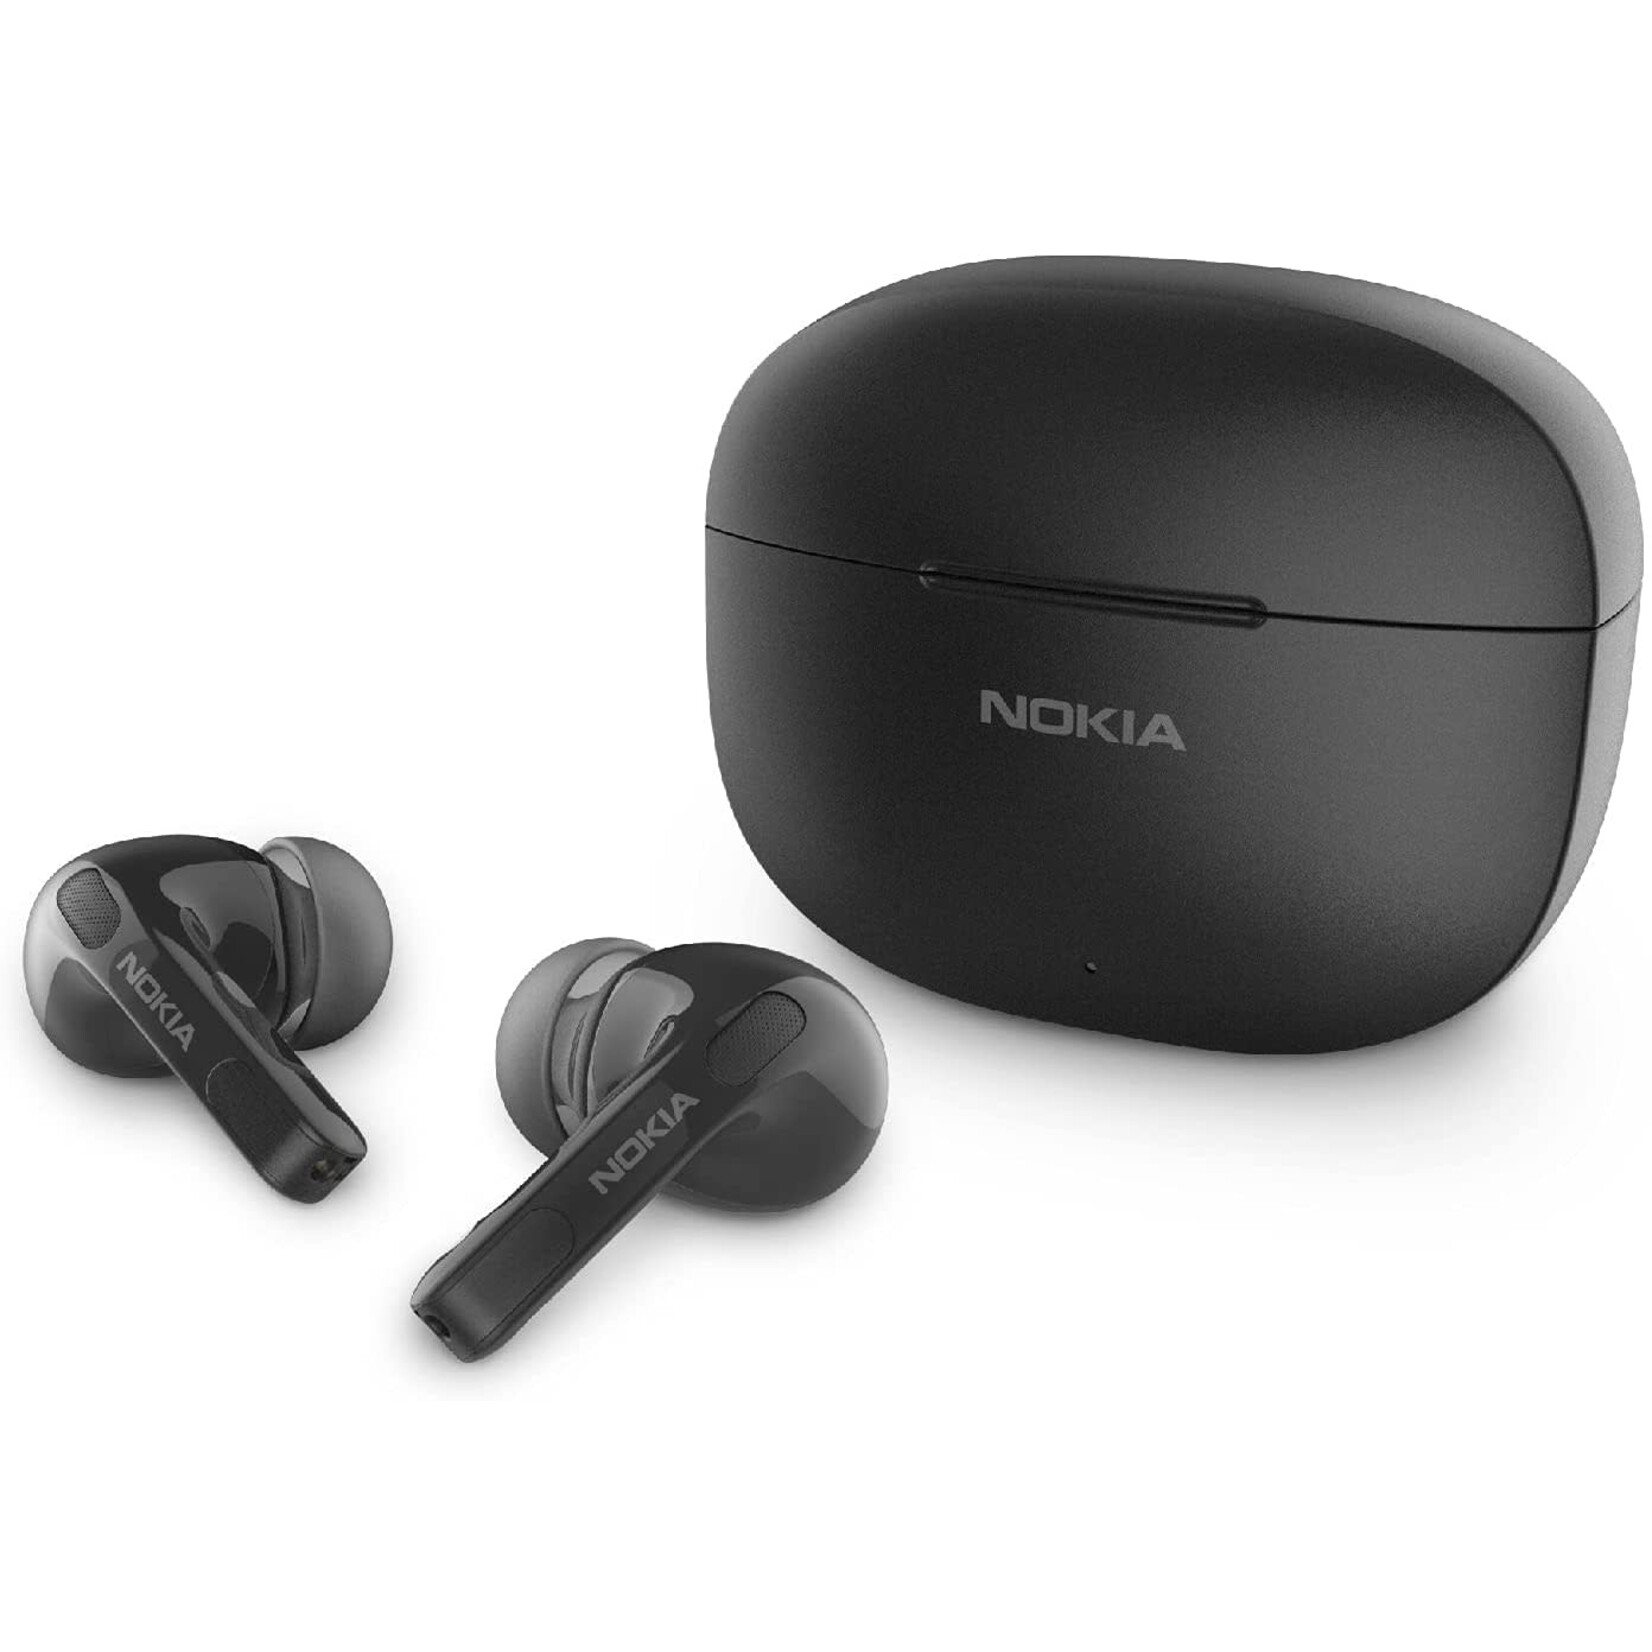 Nokia Nokia Go Earbuds+ True Wireless Earbuds TWS-201BK - Portable Bluetooth 5.0 in-Ear Headphones with Touch Control - Comfortable Fit, Voice Assistant-Enabled, 26 Hours Use with Charging Case - Black